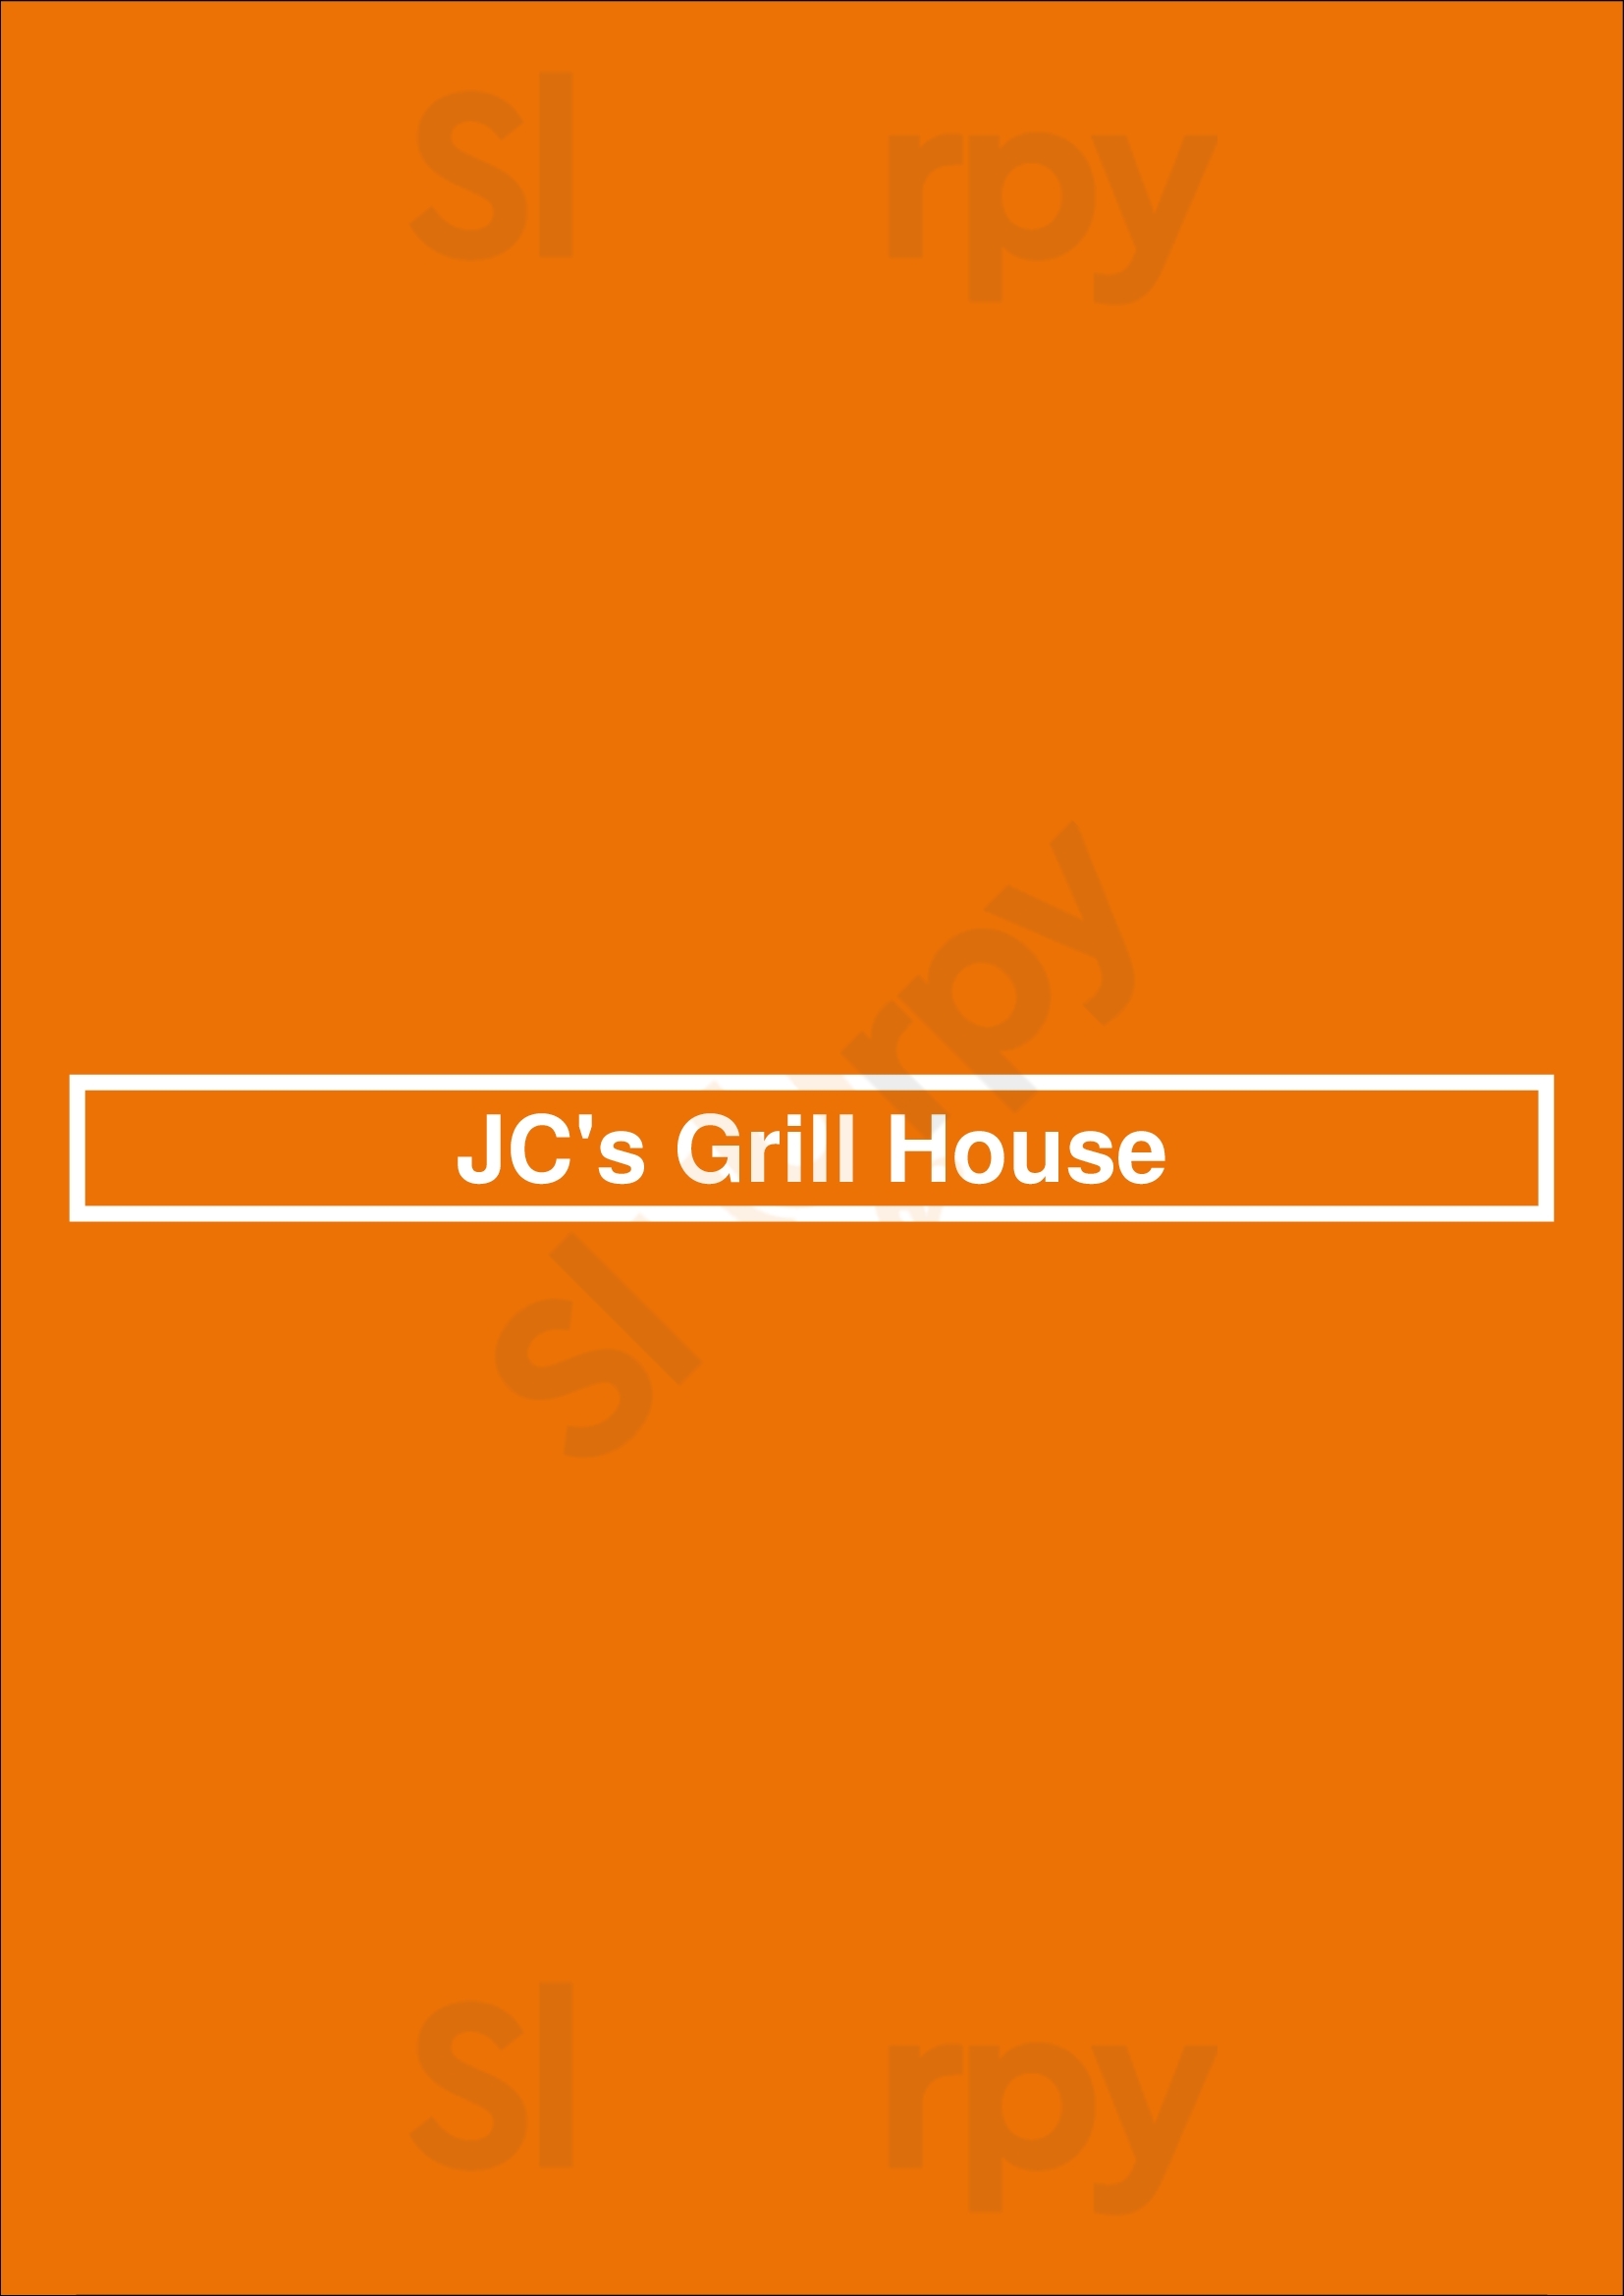 Jc's Grill House Mississauga Menu - 1